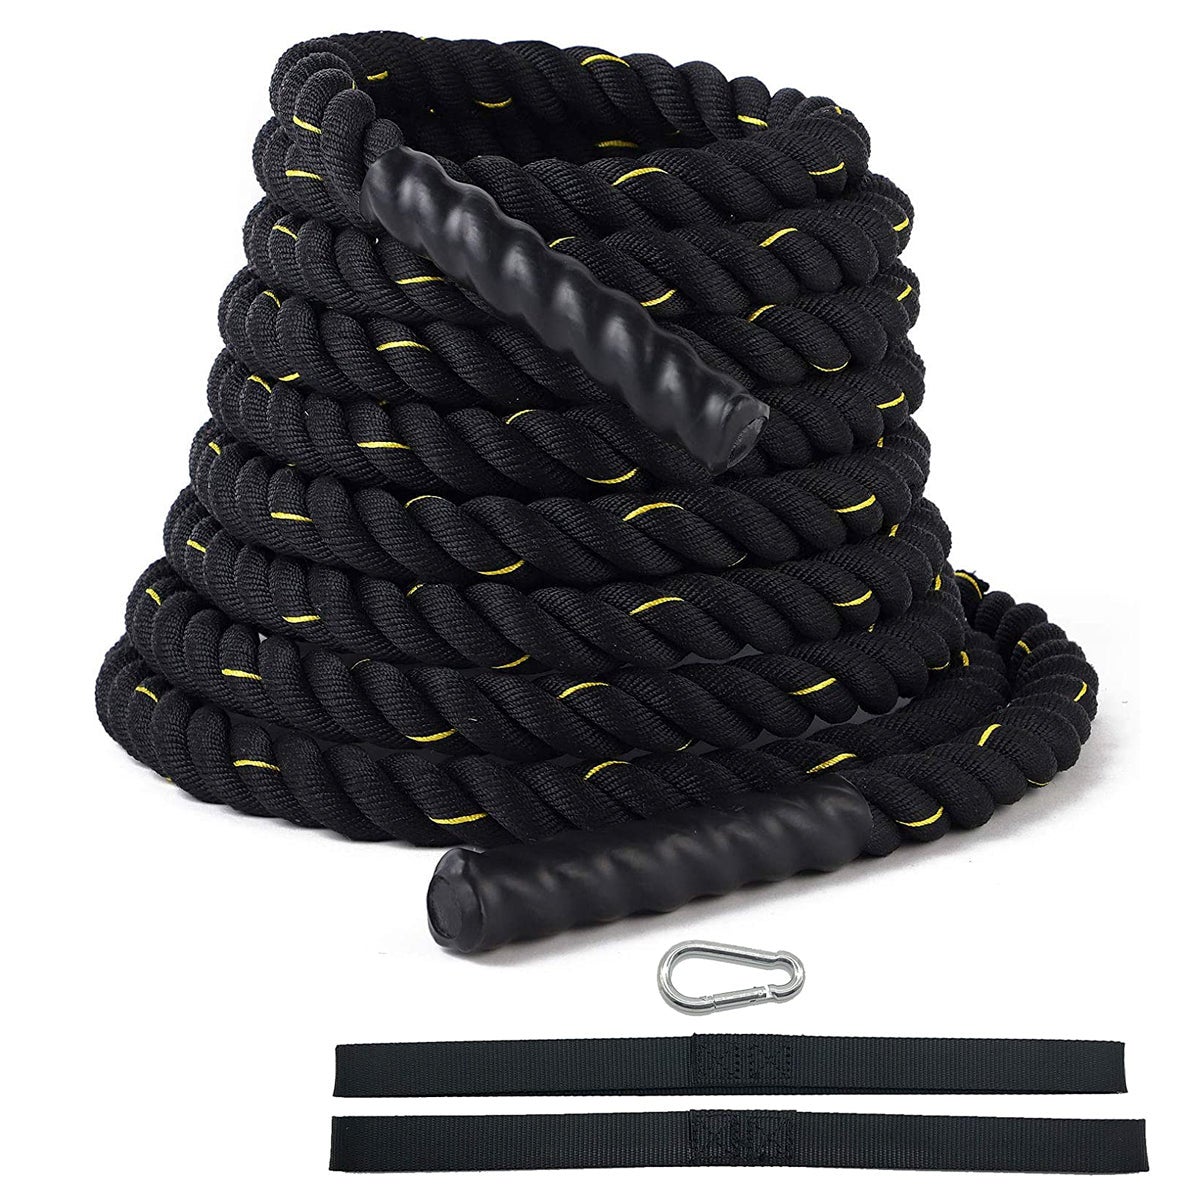 Battle Rope 38mm Diameter Poly Dacron Multiple Lengths Workout Exercise Training Rope